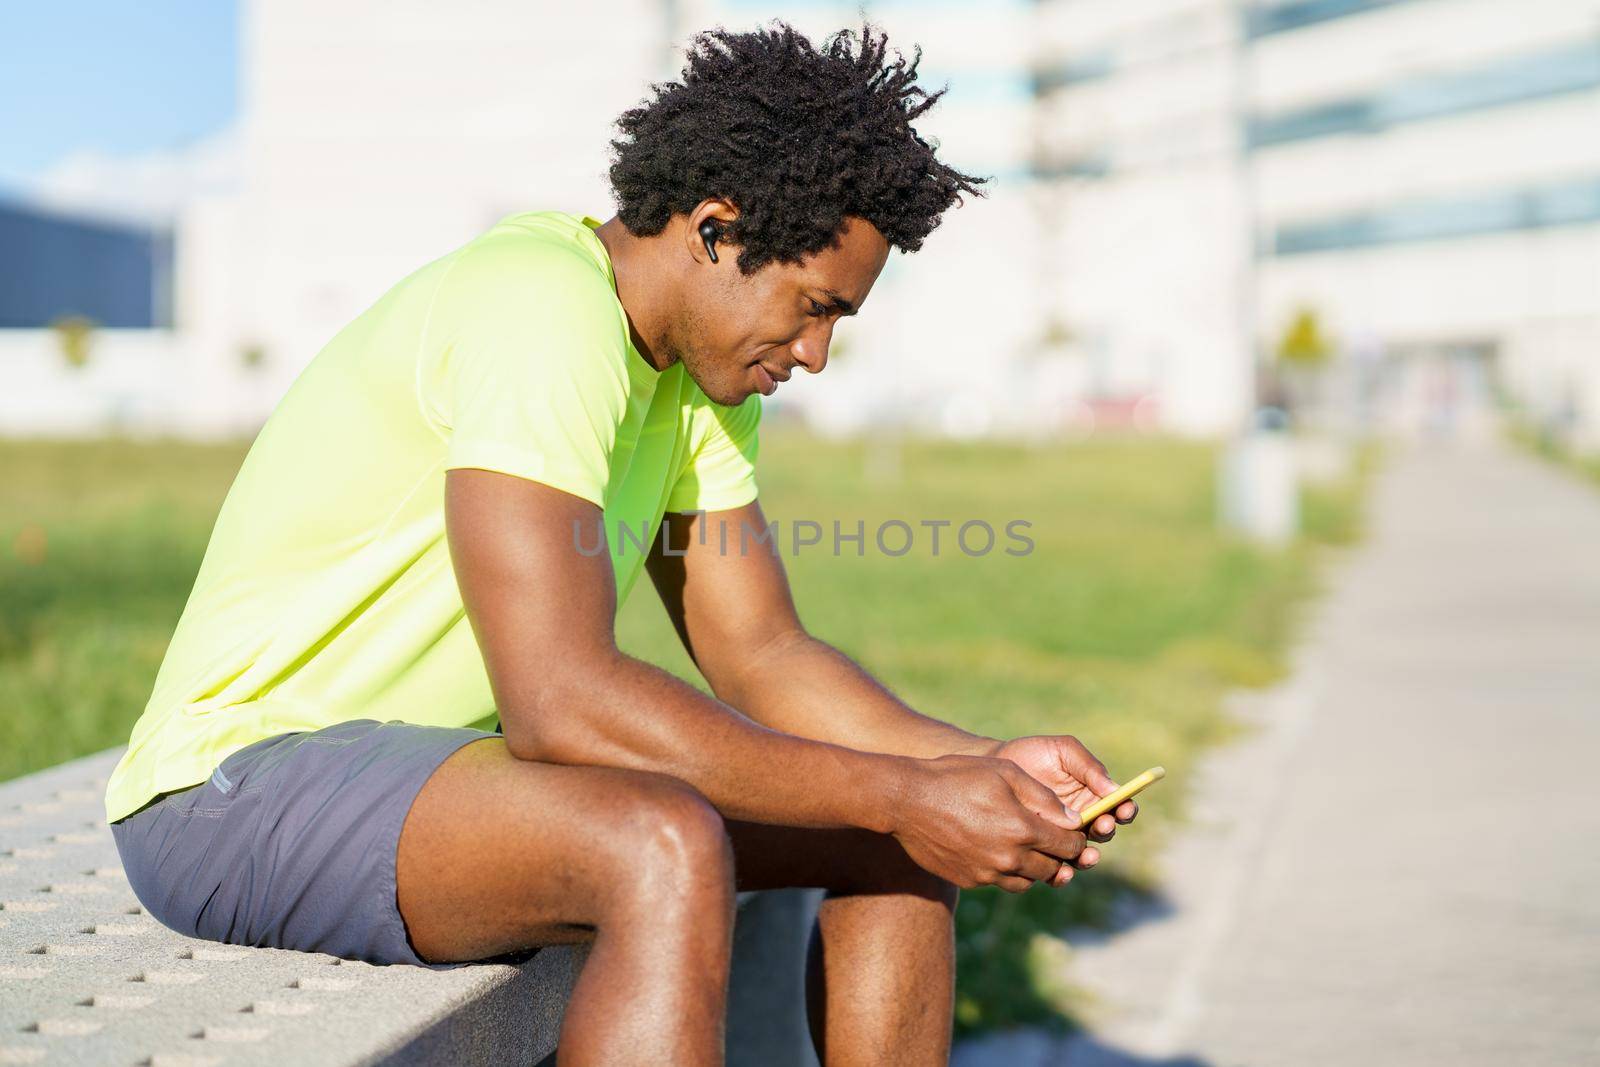 Black man with afro hair and earphones consulting his smartphone with some exercise app while resting from his workout.